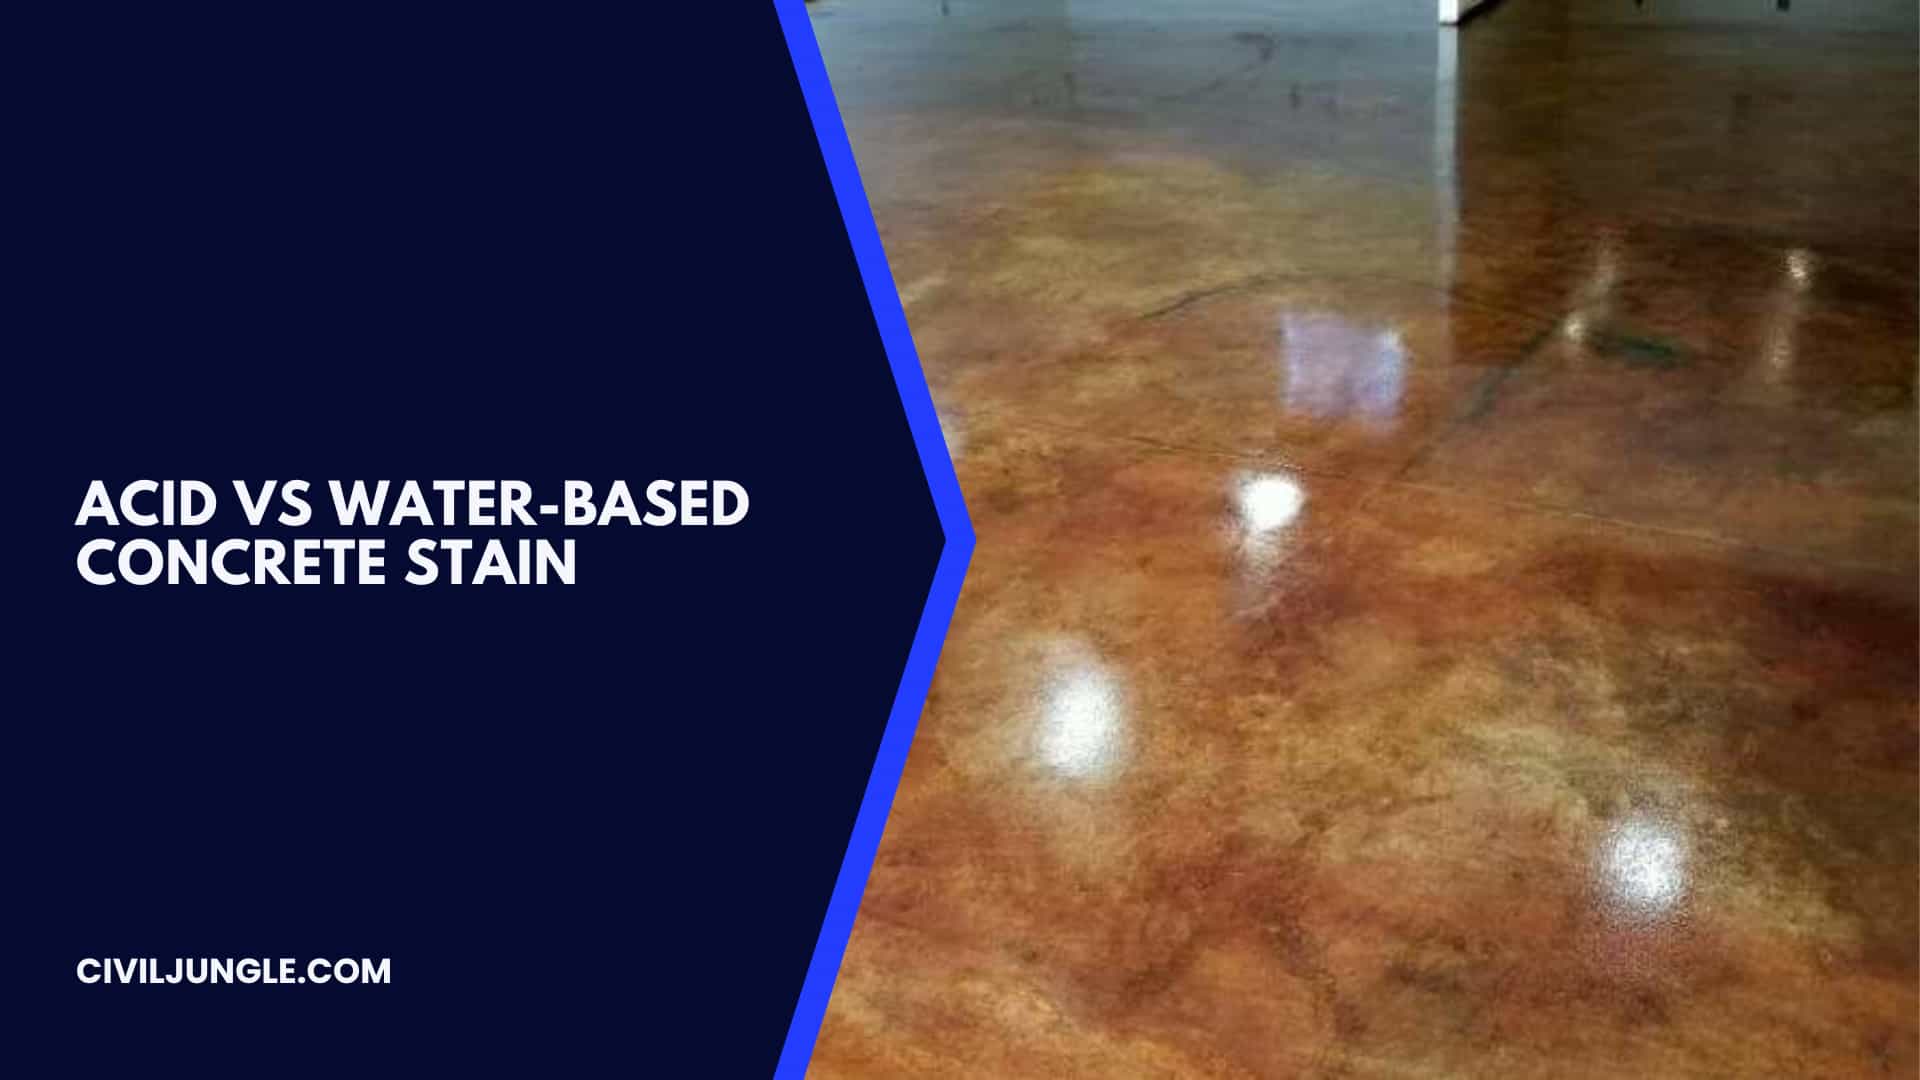 Acid Vs Water-Based Concrete Stain